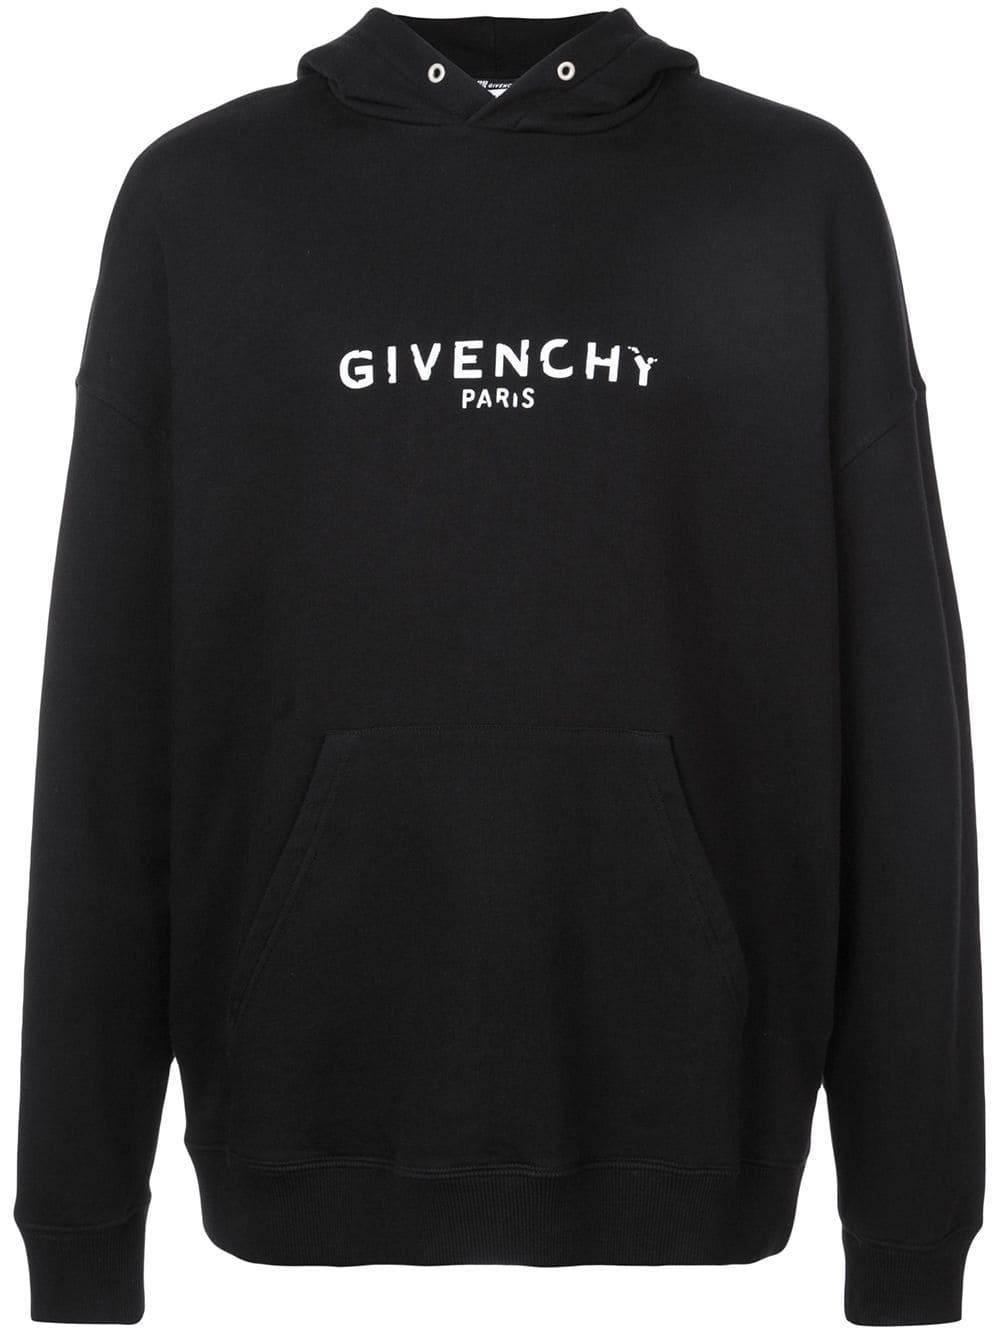 Givenchy Cotton Blurred Paris Hoodie in Black for Men - Save 39% - Lyst